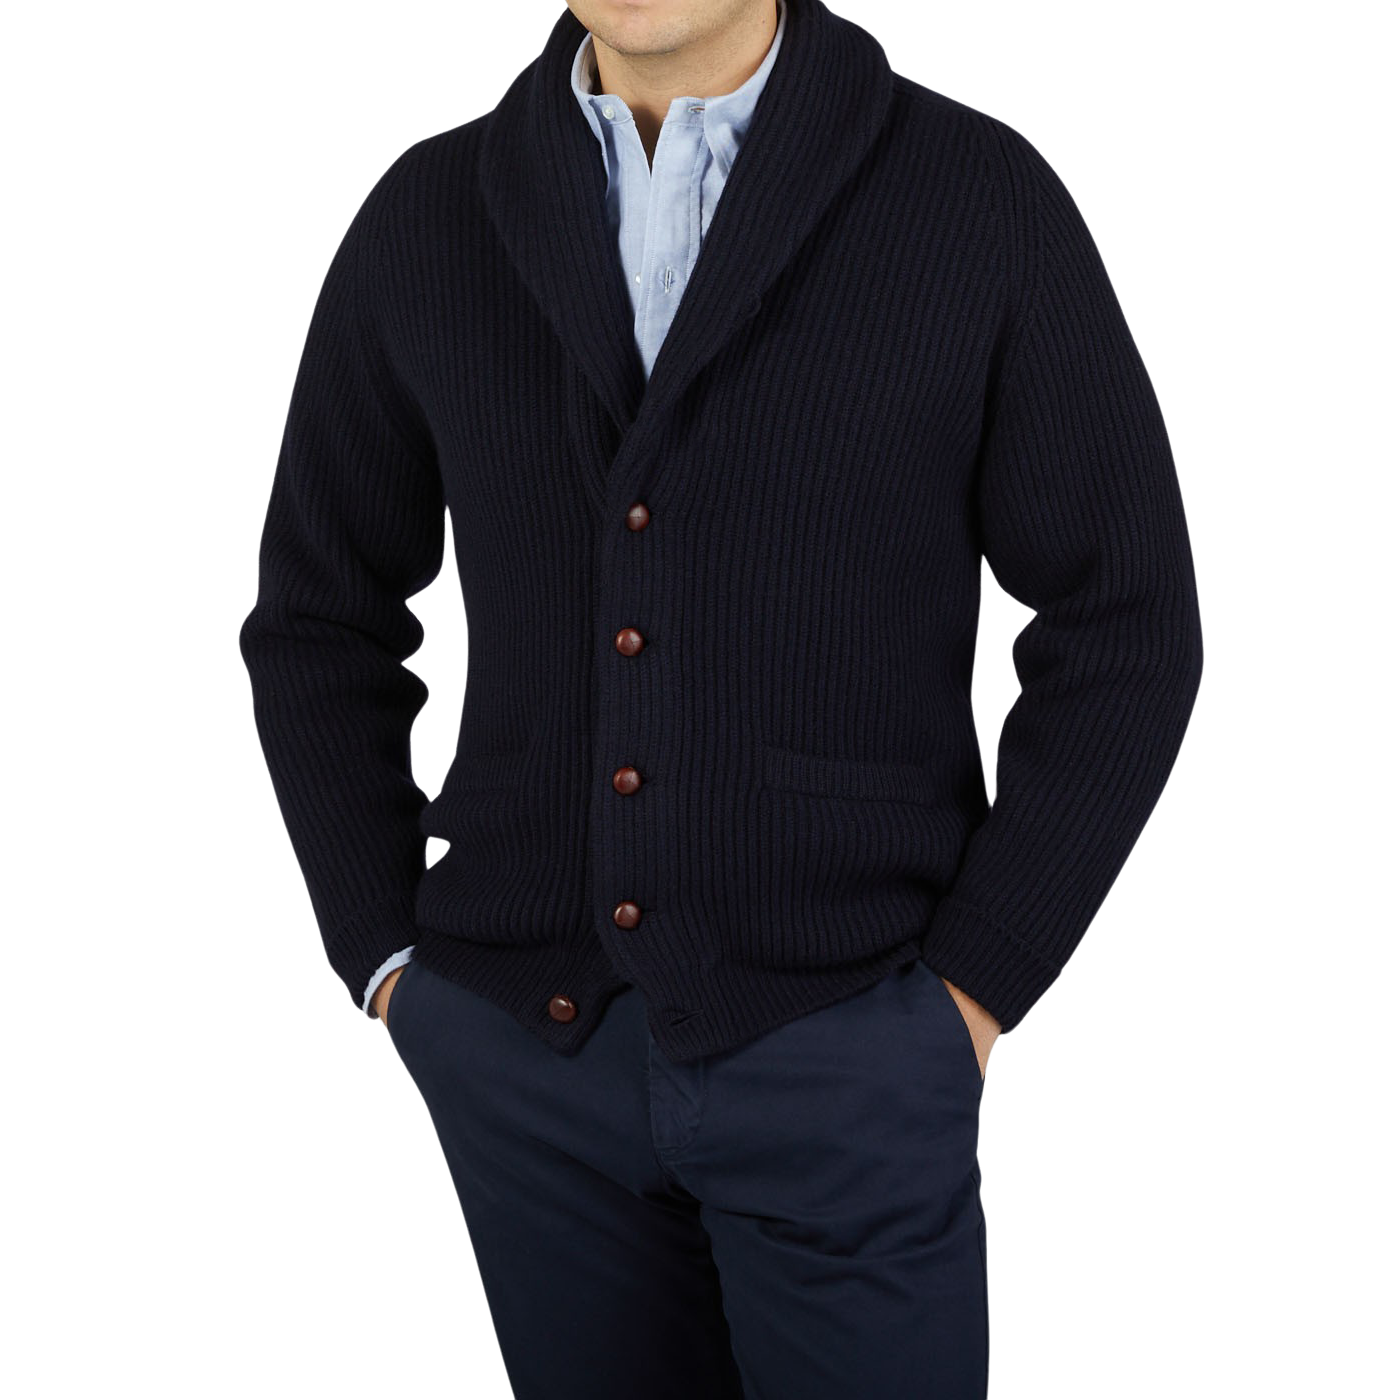 A man wearing a Navy Lambswool Shawl Collar Cardigan made by William Lockie with leather buttons.